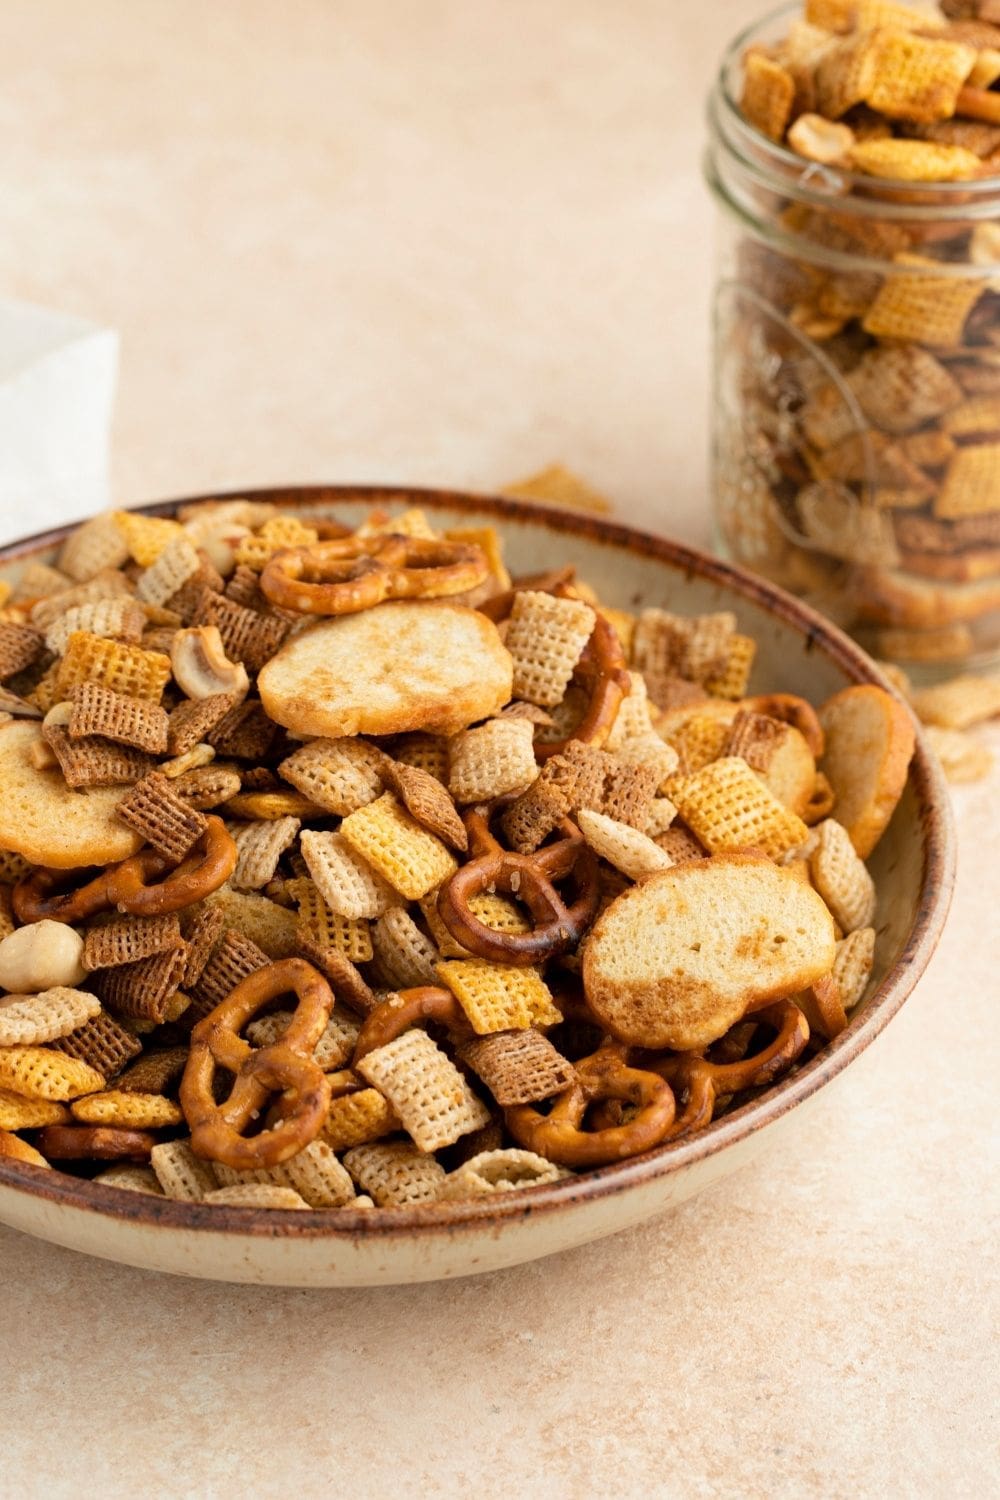 https://insanelygoodrecipes.com/wp-content/uploads/2021/12/Homemade-Chex-Mix-with-Cereals-Nuts-and-Pretzels.jpg